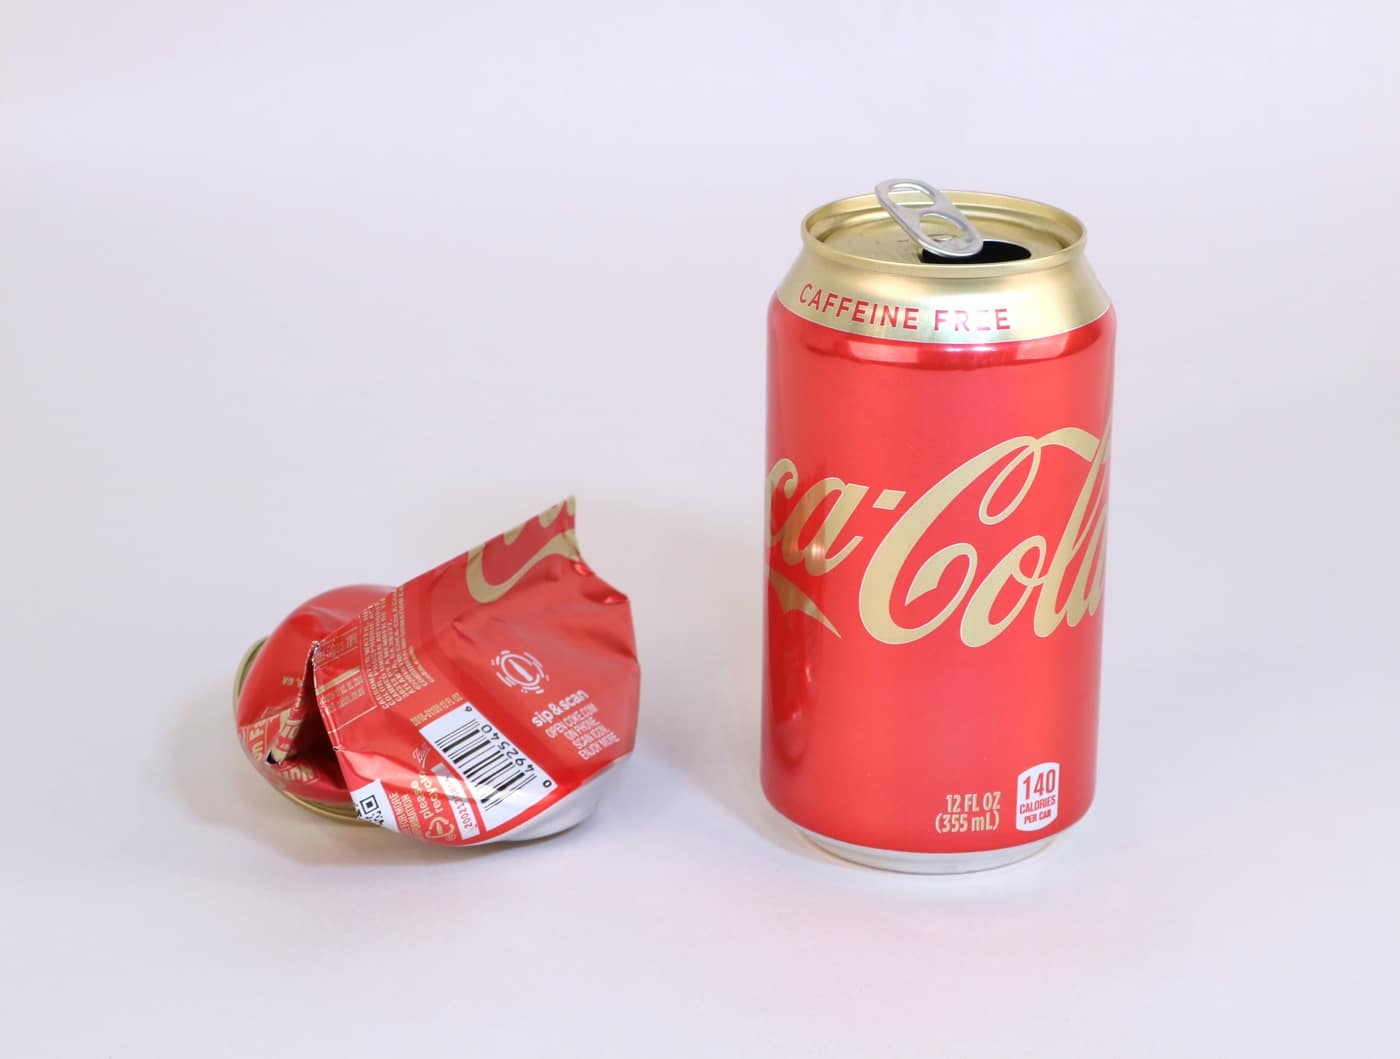 coke can as a weapon